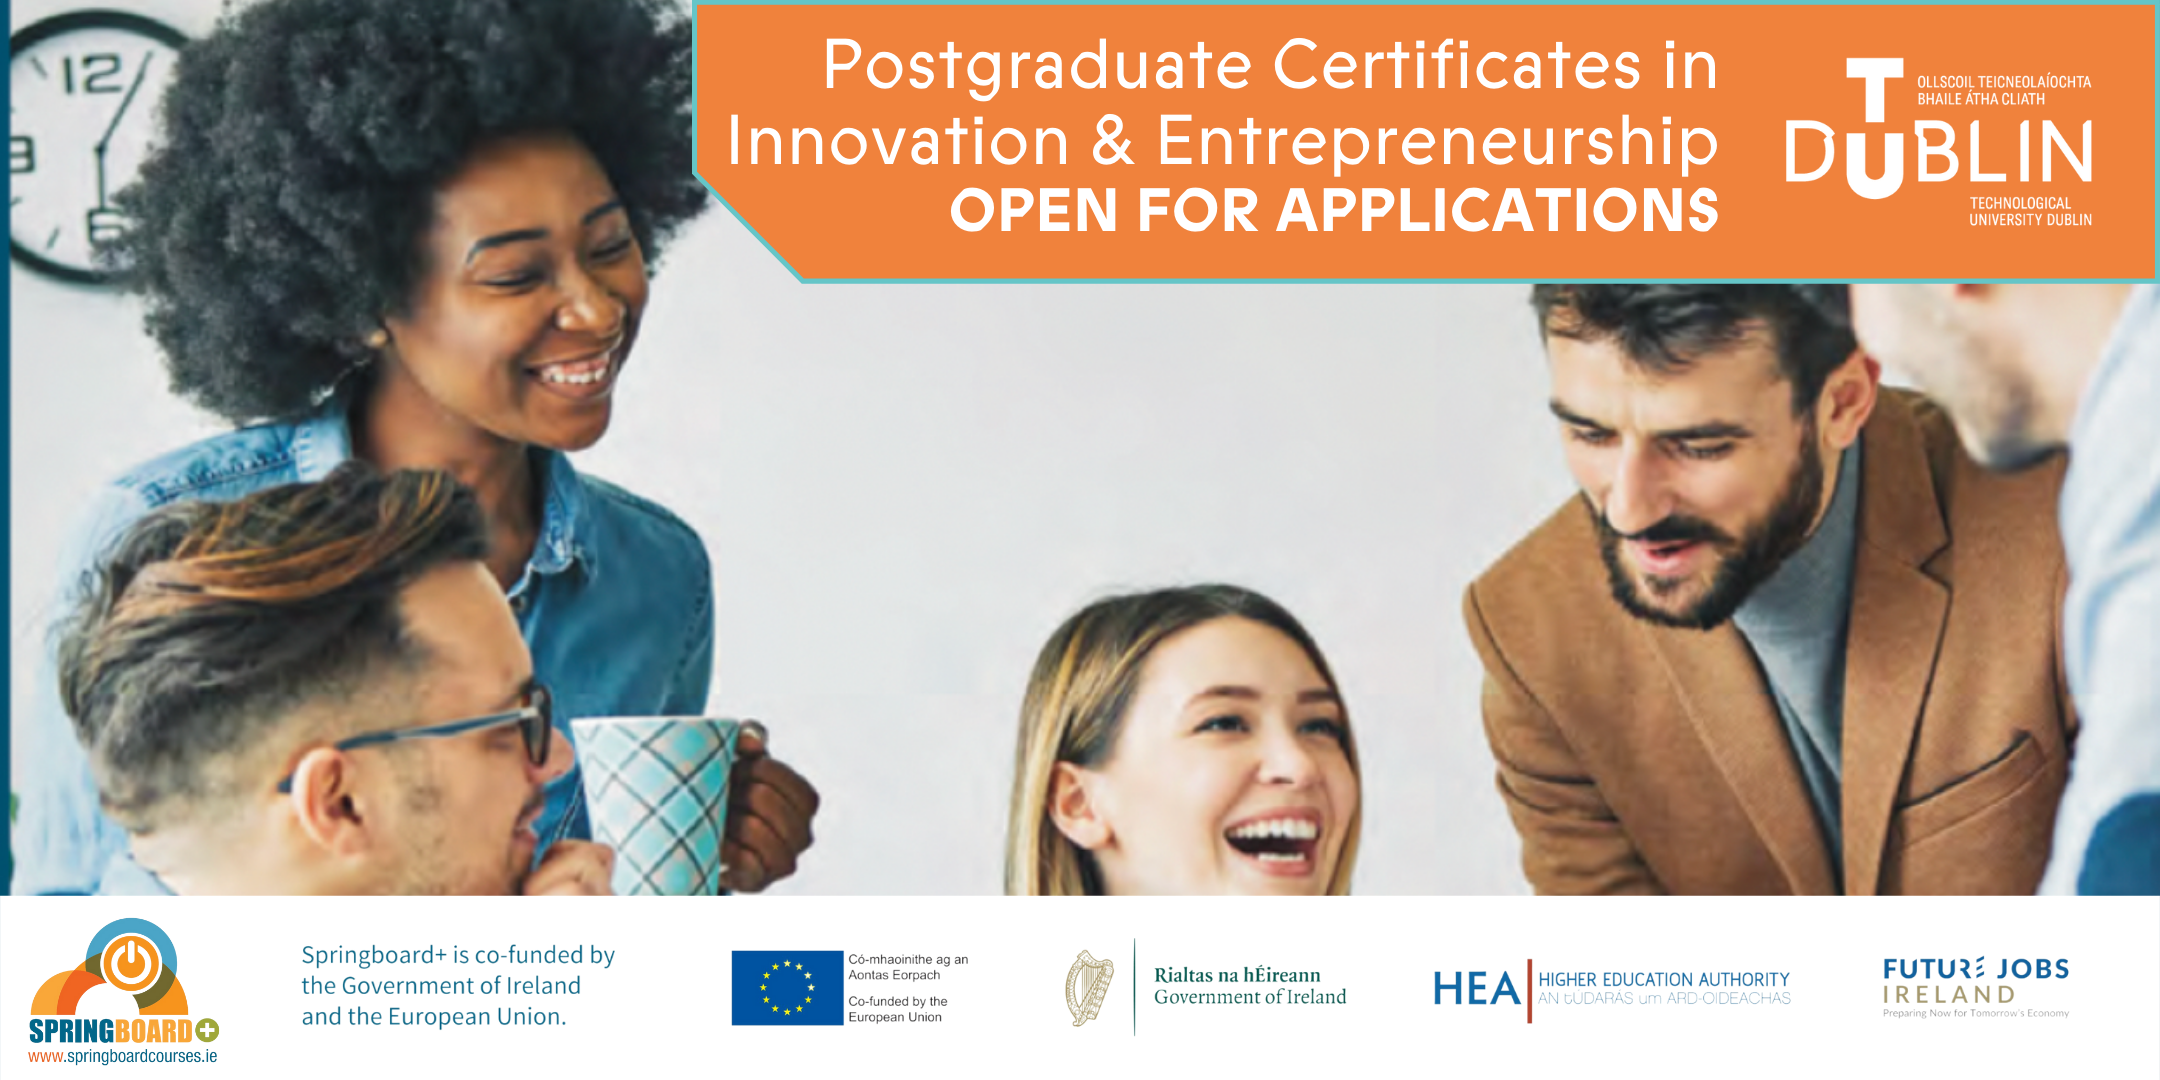 Image for 3 new Postgraduate Certificates in Entrepreneurship & Innovation launched